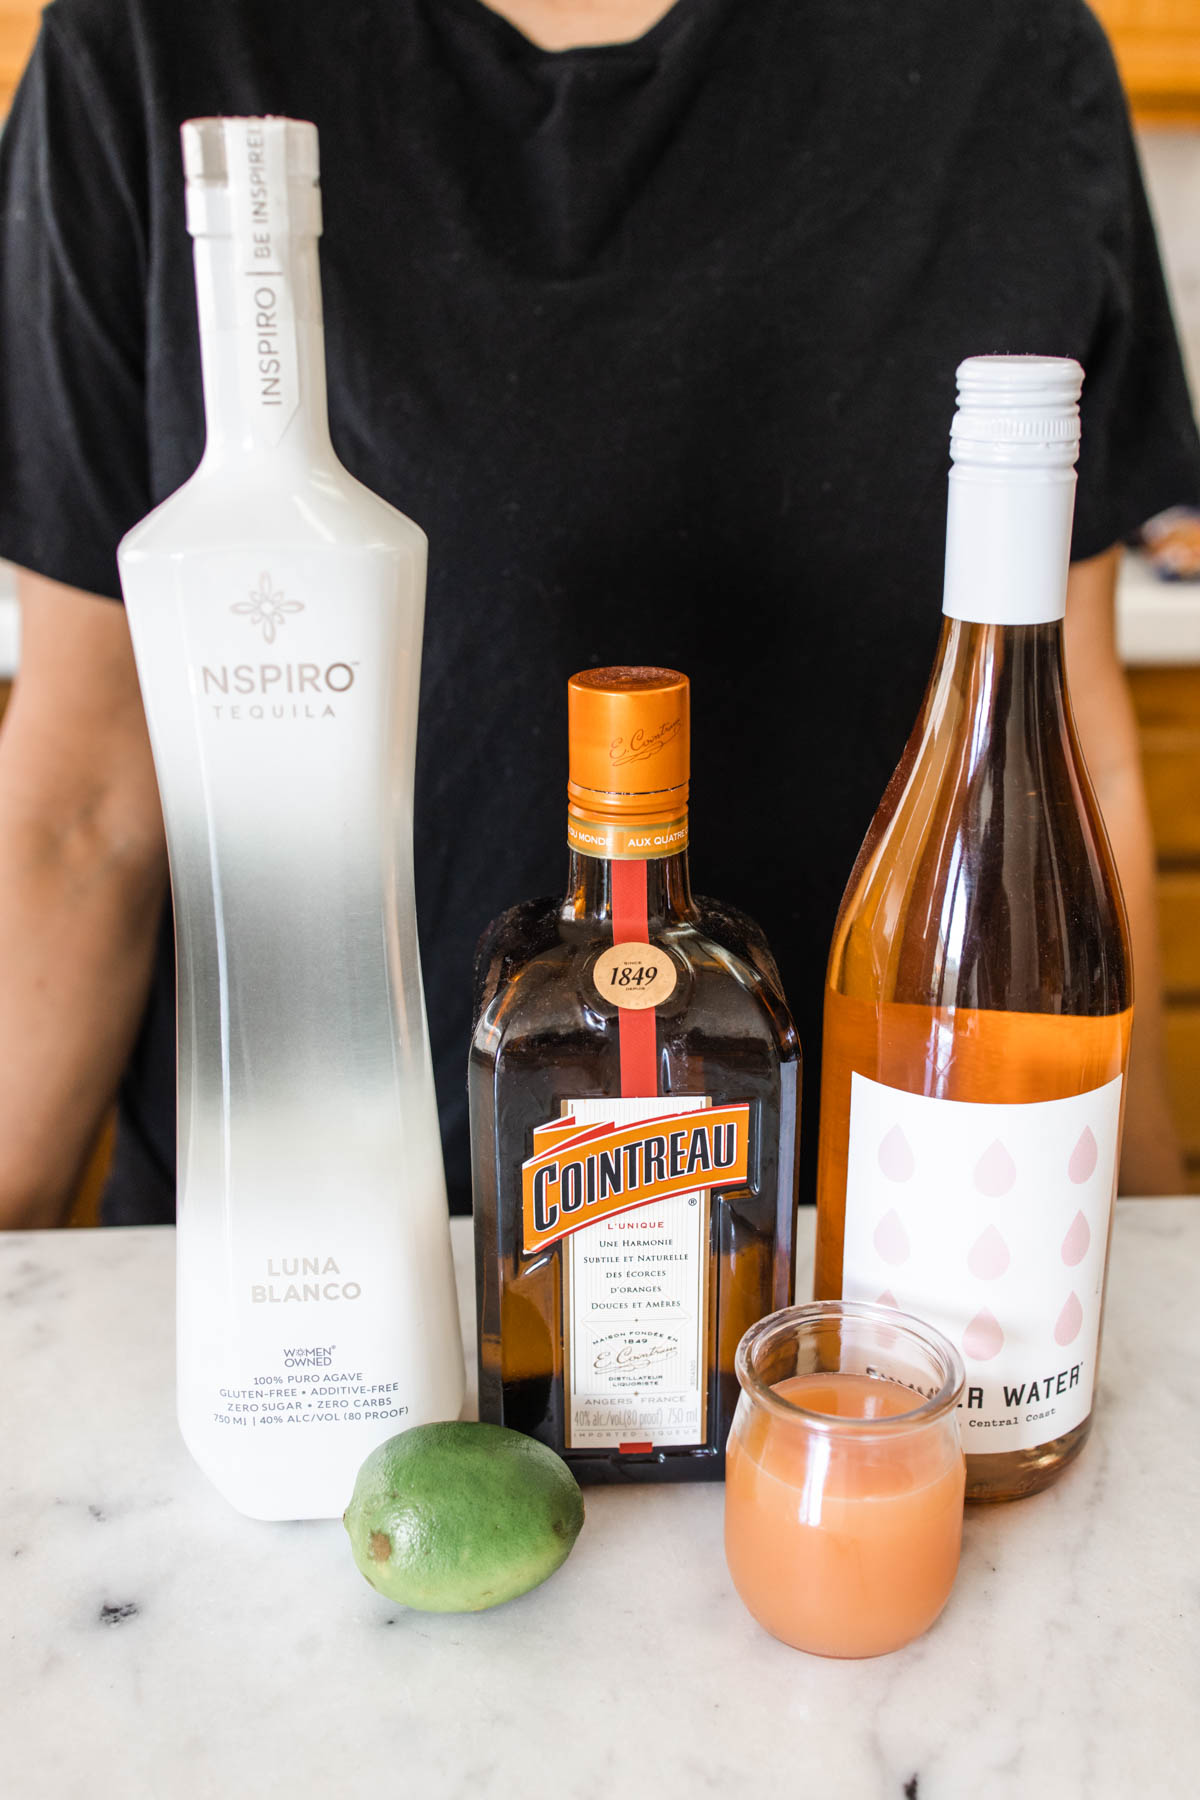 A bottle of Inspiro tequila, Cointreau, rose wine, fresh lime, and grapefruit juice.